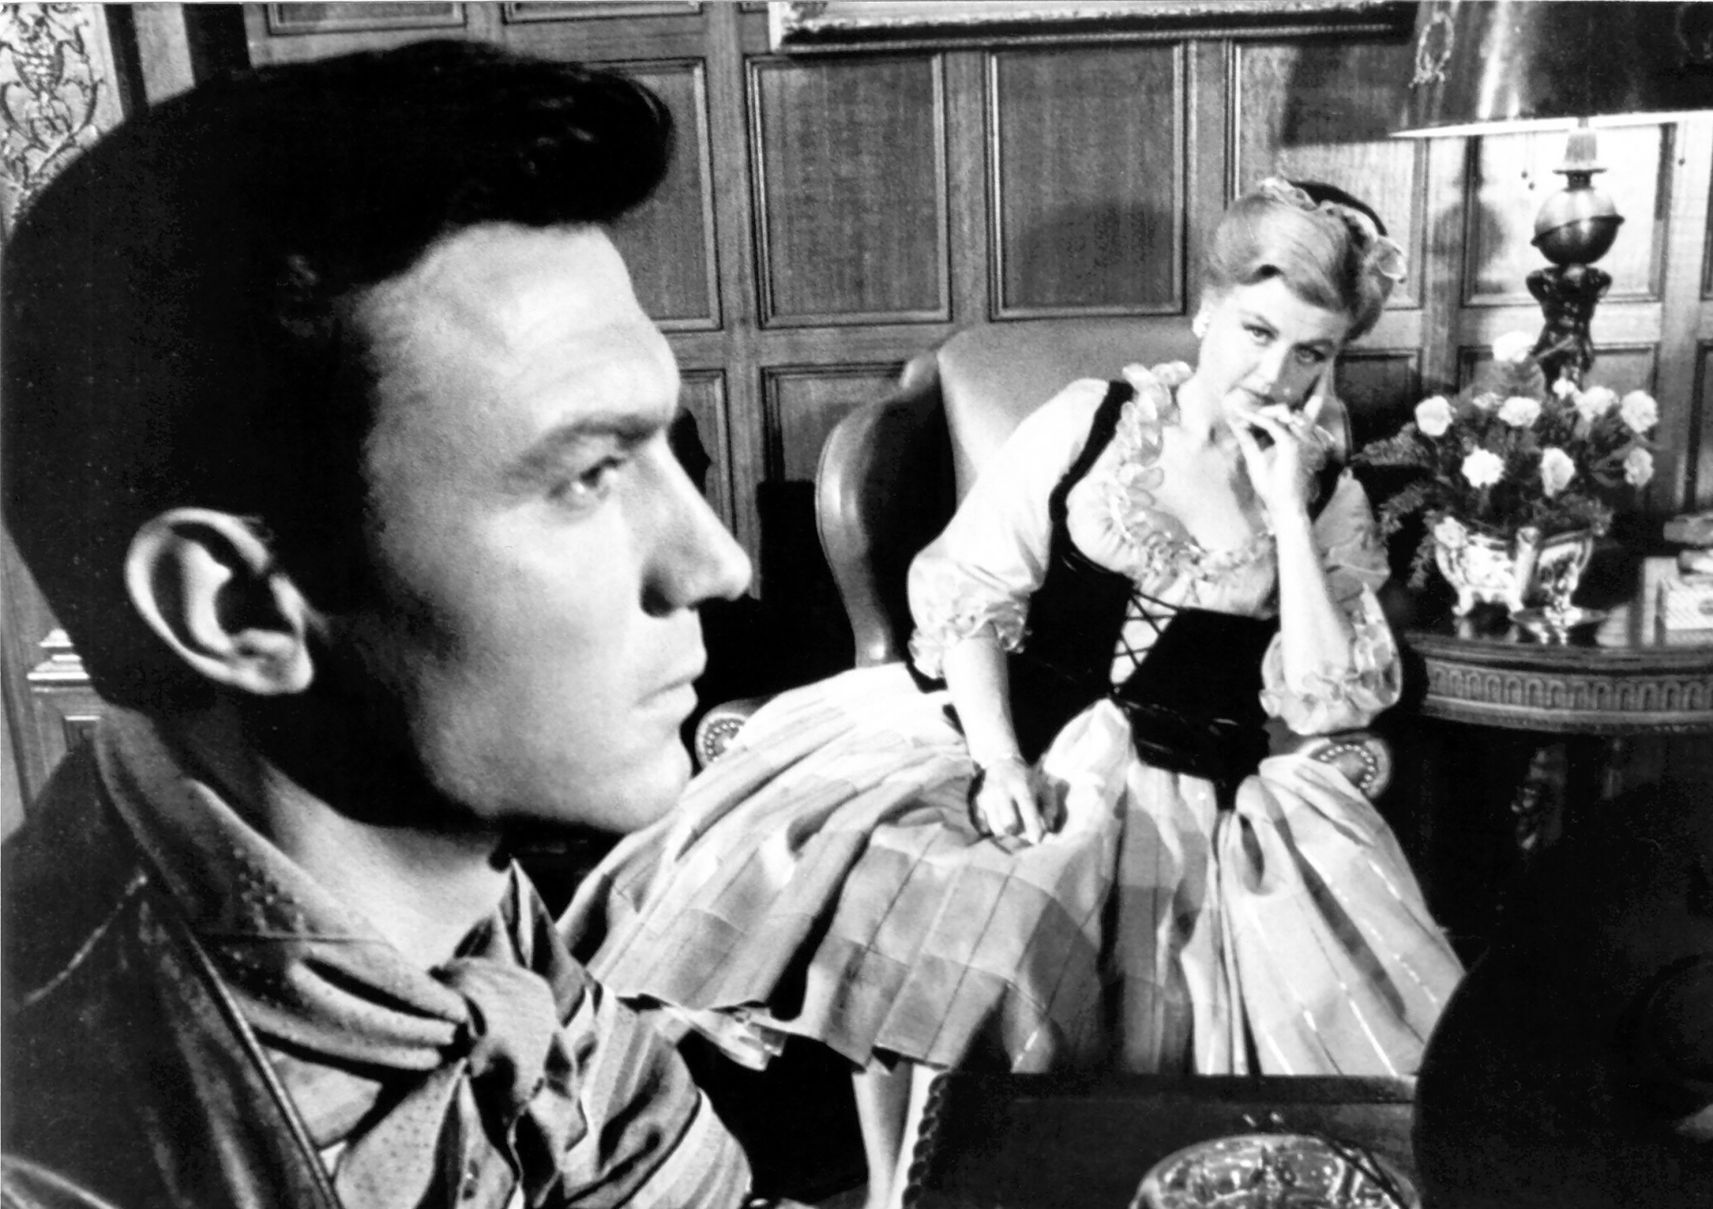 the manchurian candidate 1962 full movie youtube